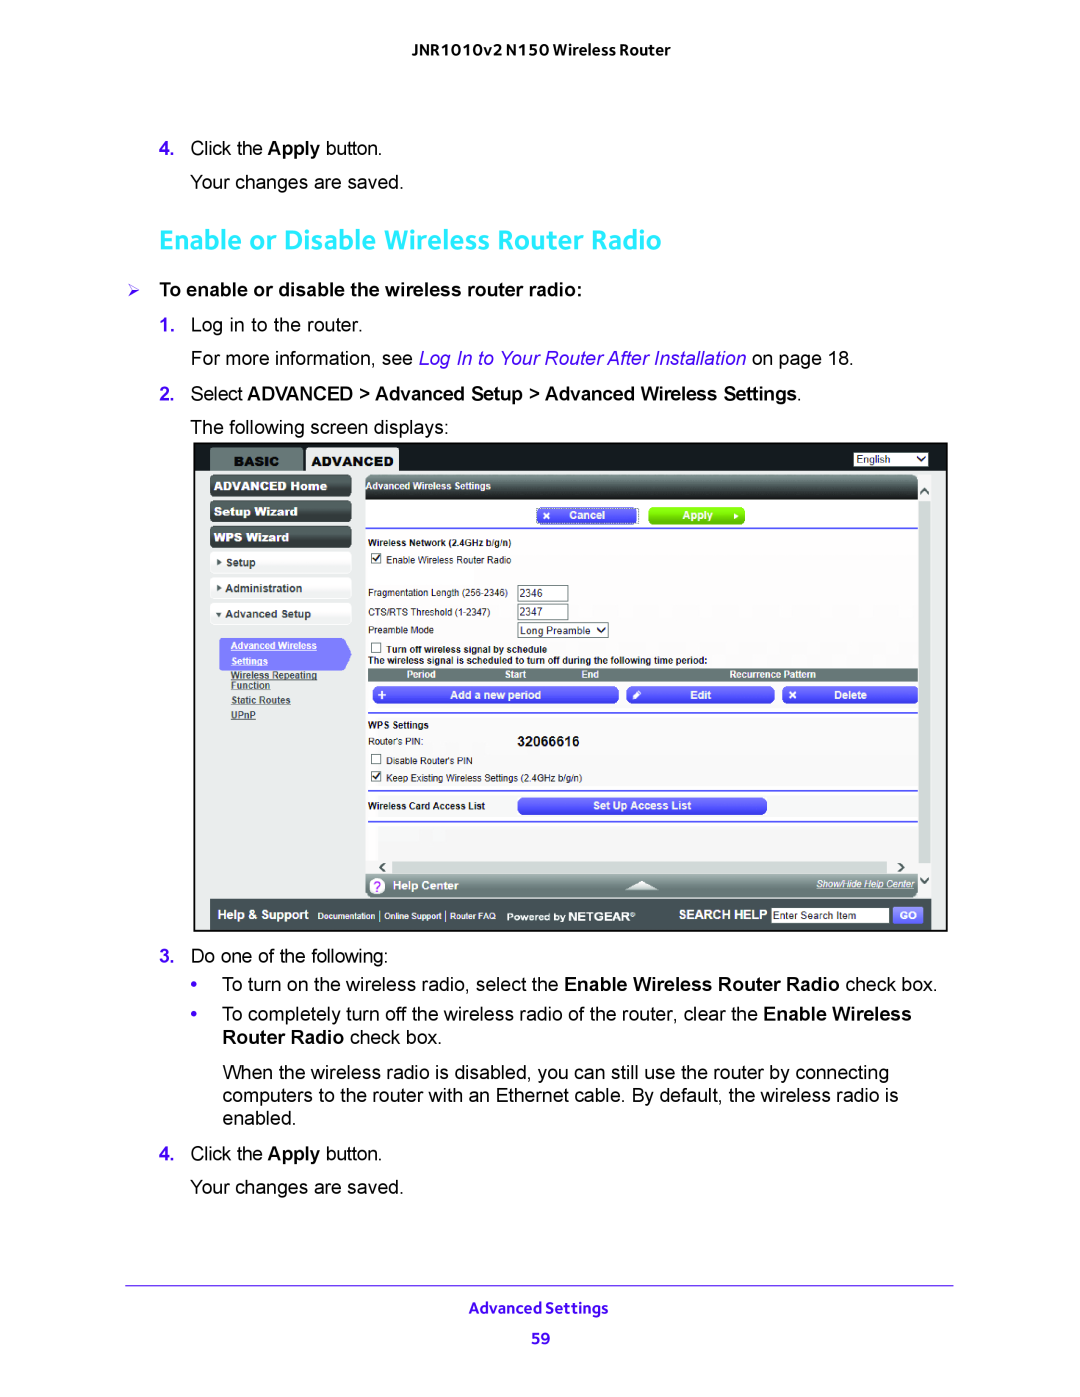 NETGEAR JNR1010V2 user manual Enable or Disable Wireless Router Radio,  To enable or disable the wireless router radio 